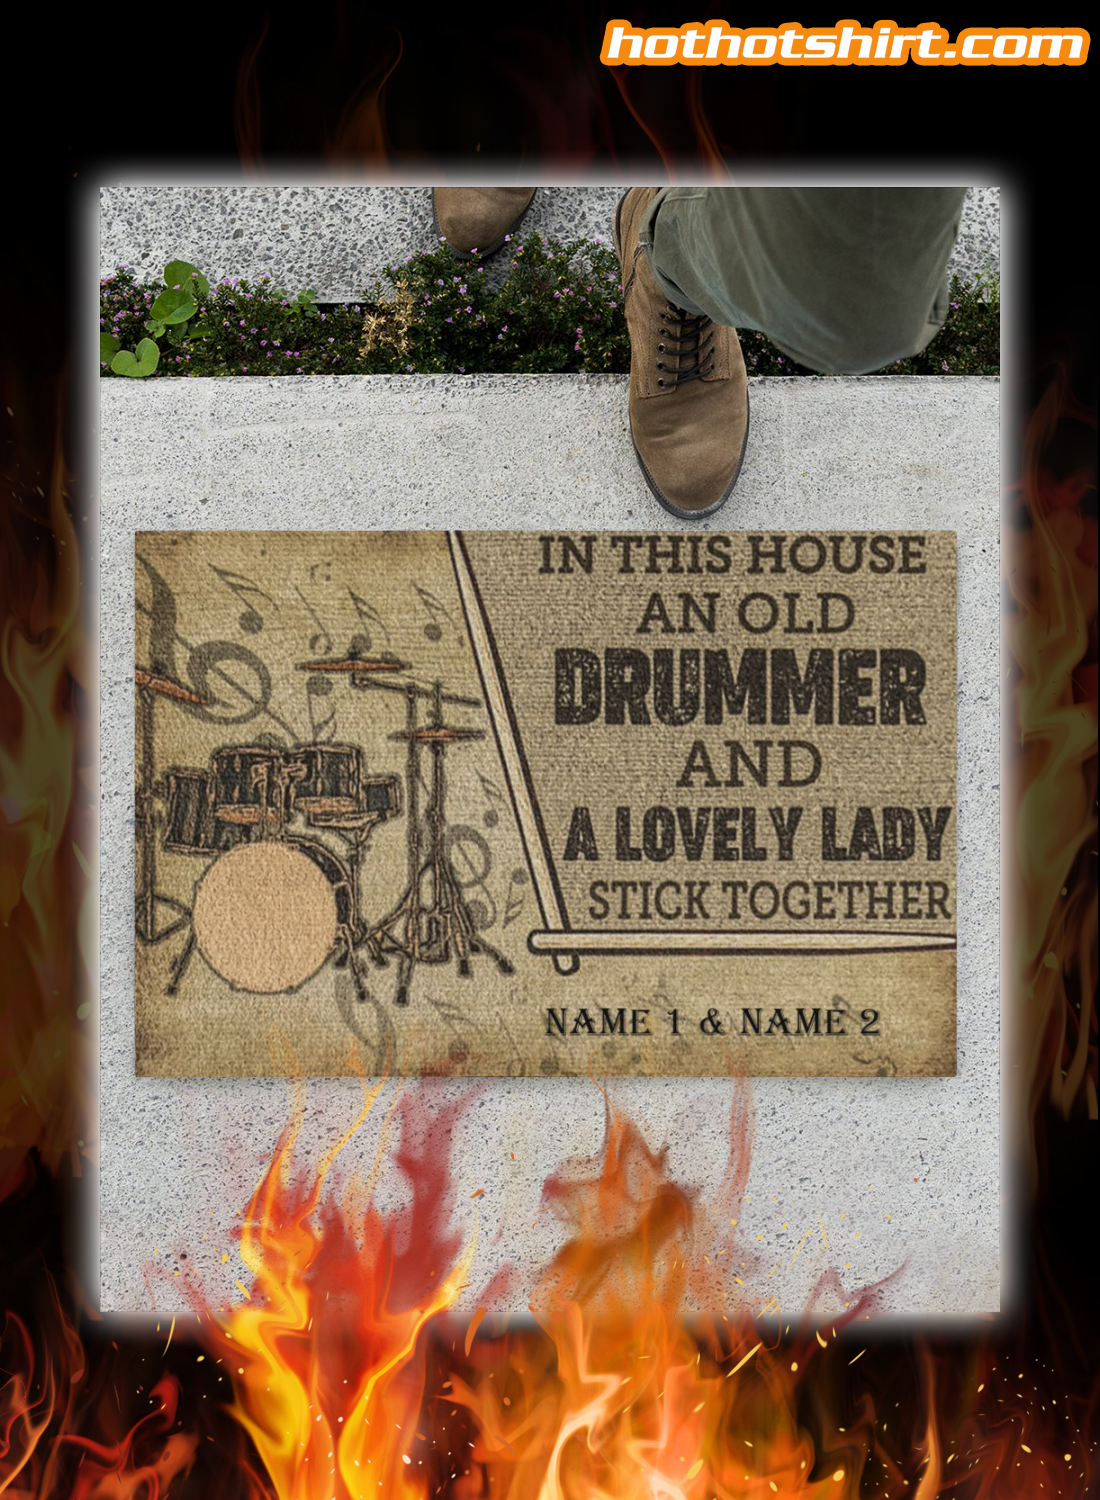 Drummer and a lovely lady stick together personalized doormat 1